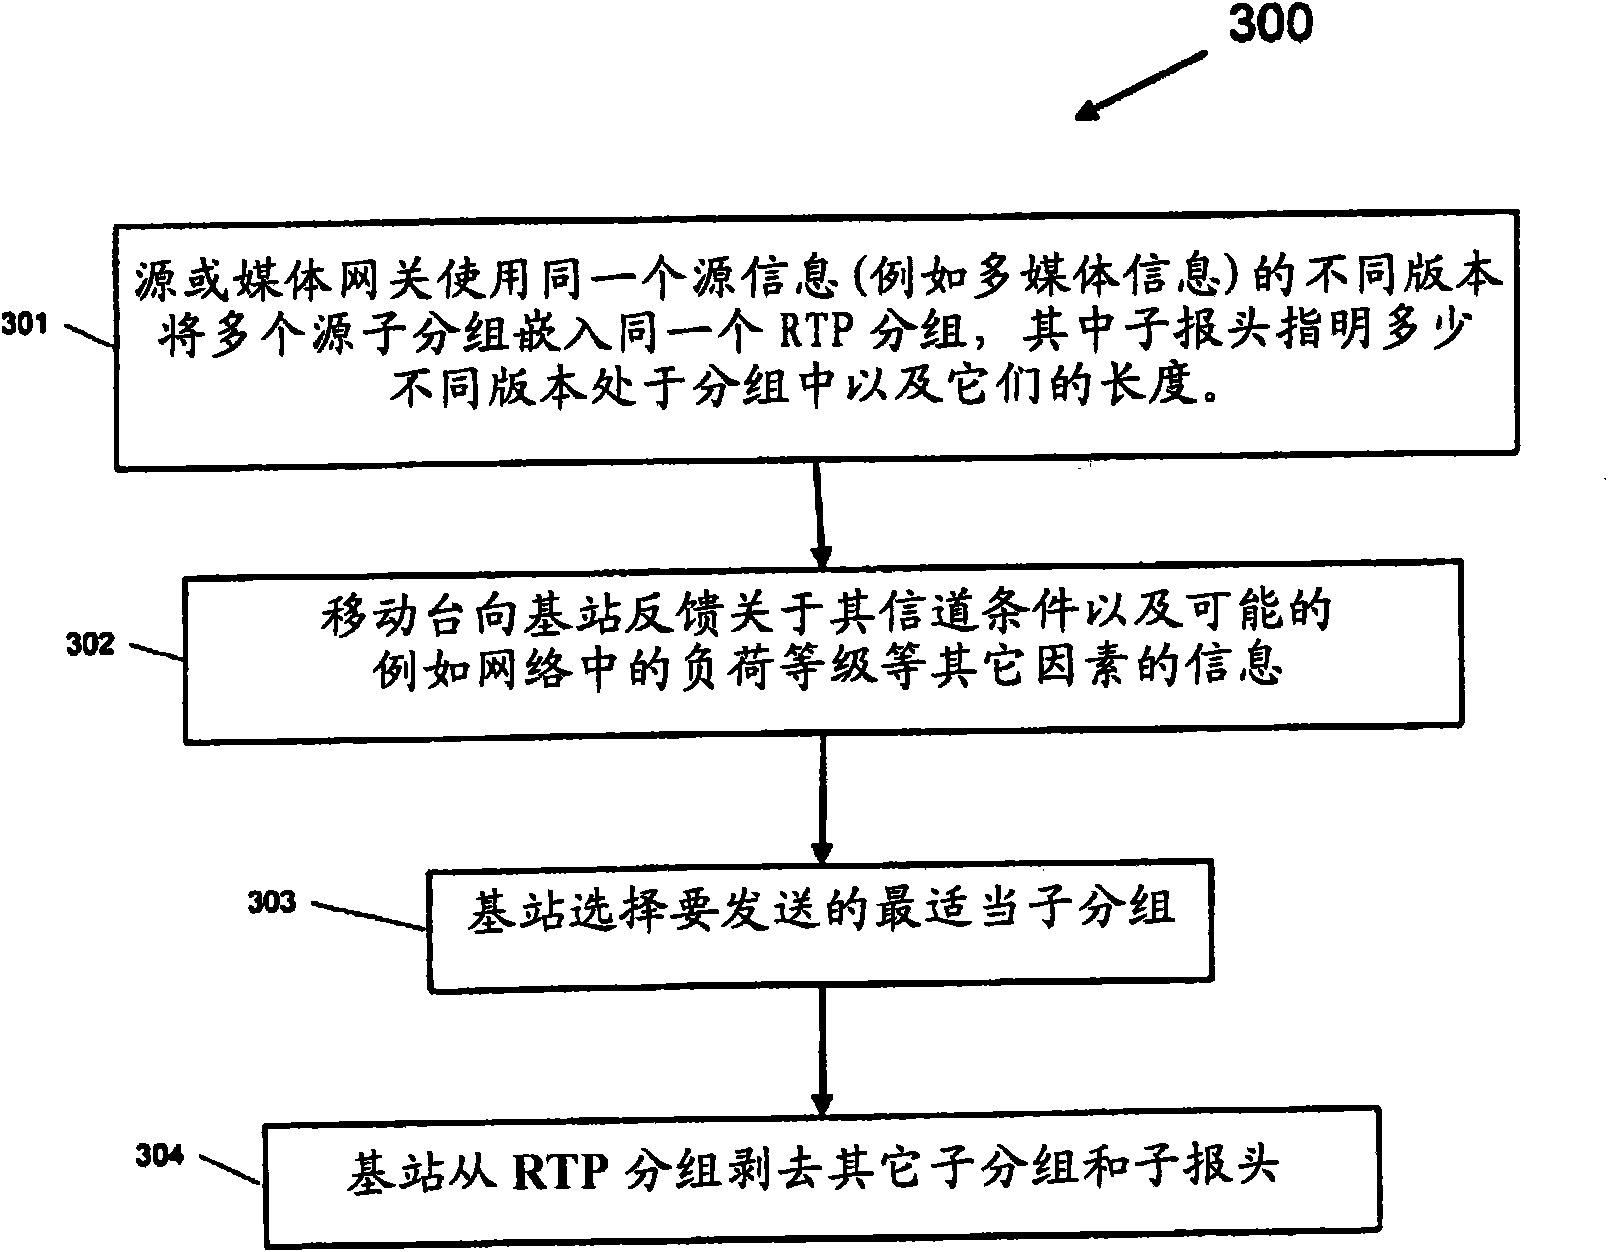 Method and apparatus for efficient multimedia delivery in a wireless packet network